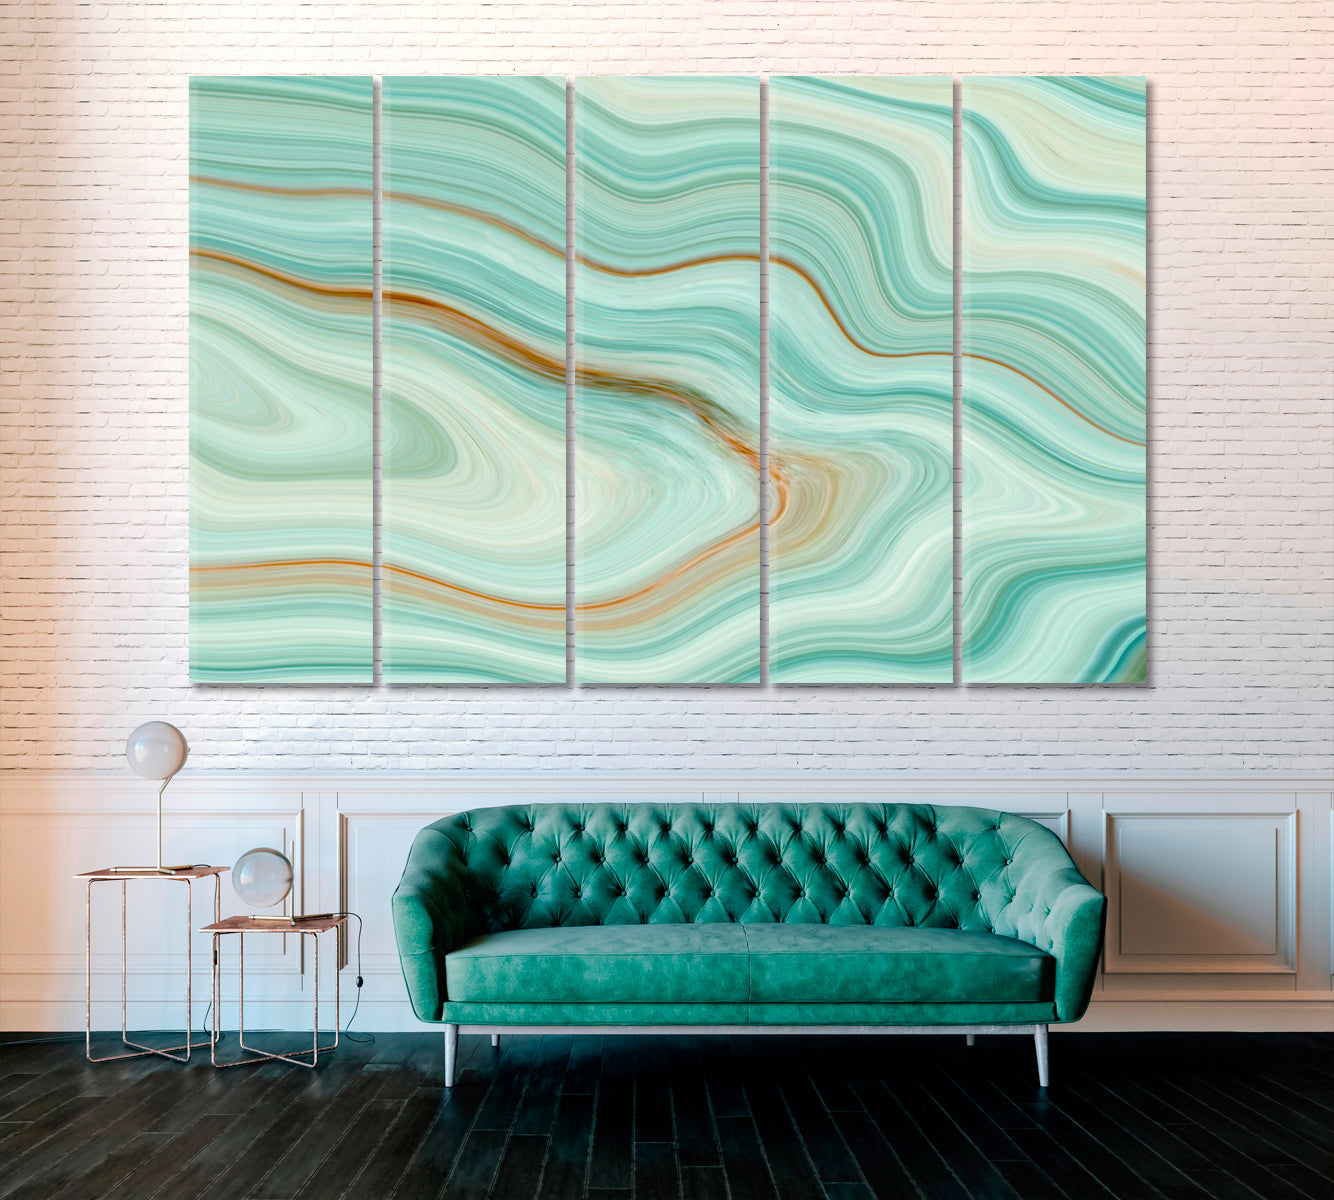 Wavy Marble or Ripple Agate Canvas Print ArtLexy 5 Panels 36"x24" inches 